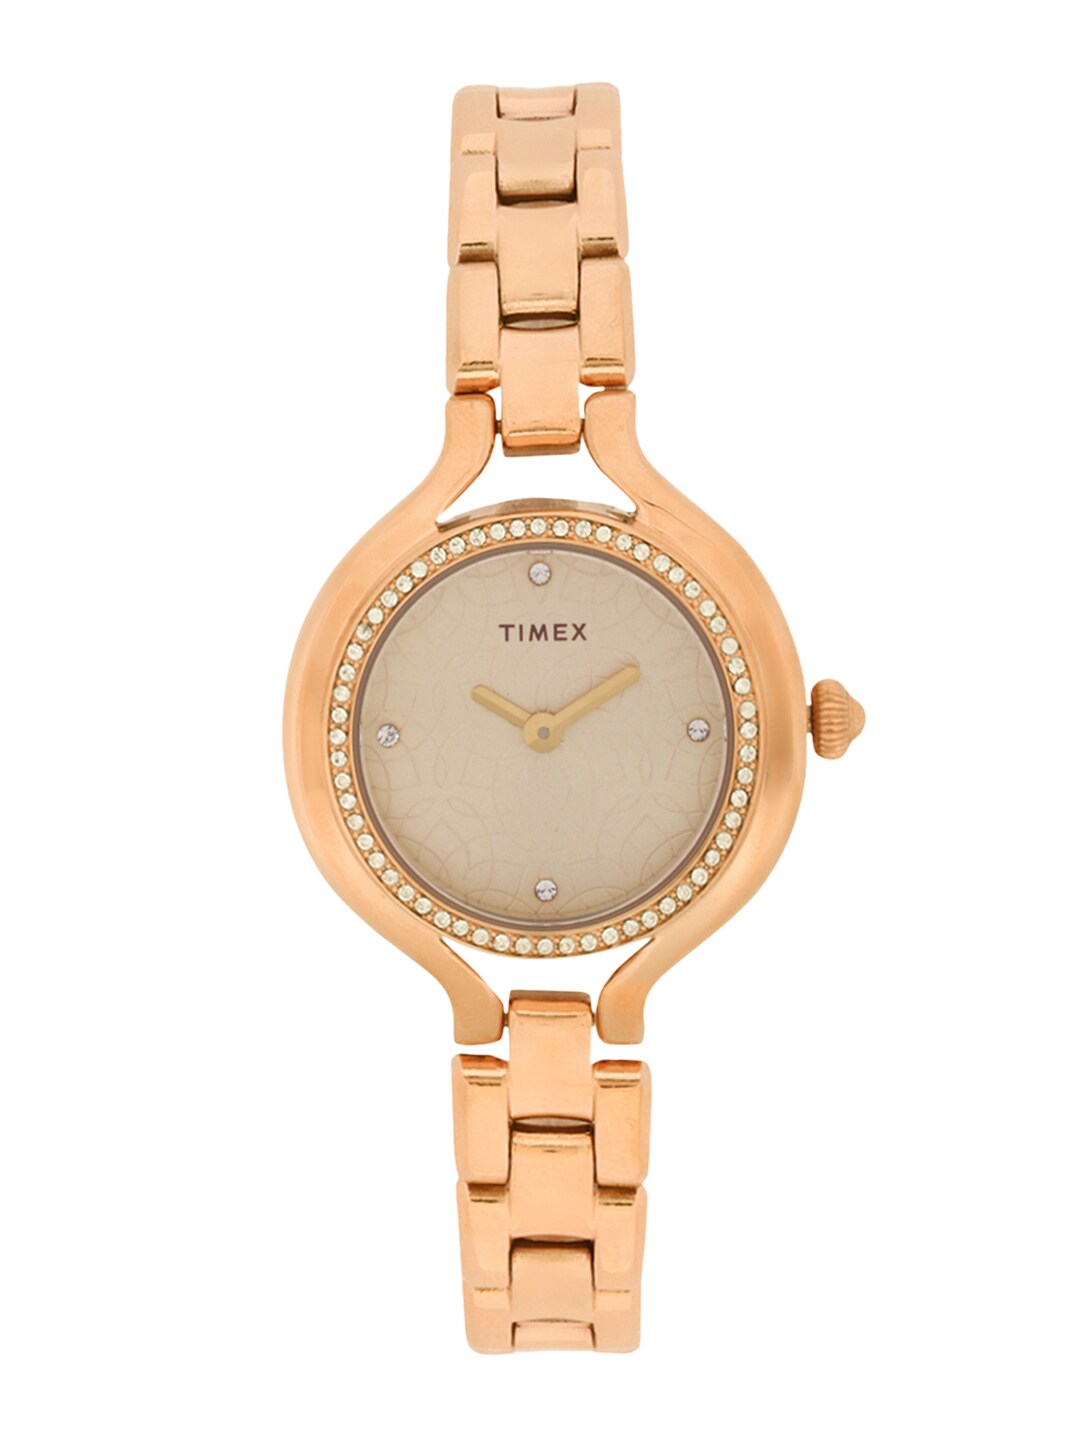 Timex Women Gold-Toned Analogue Watch TWEL14003 Price in India